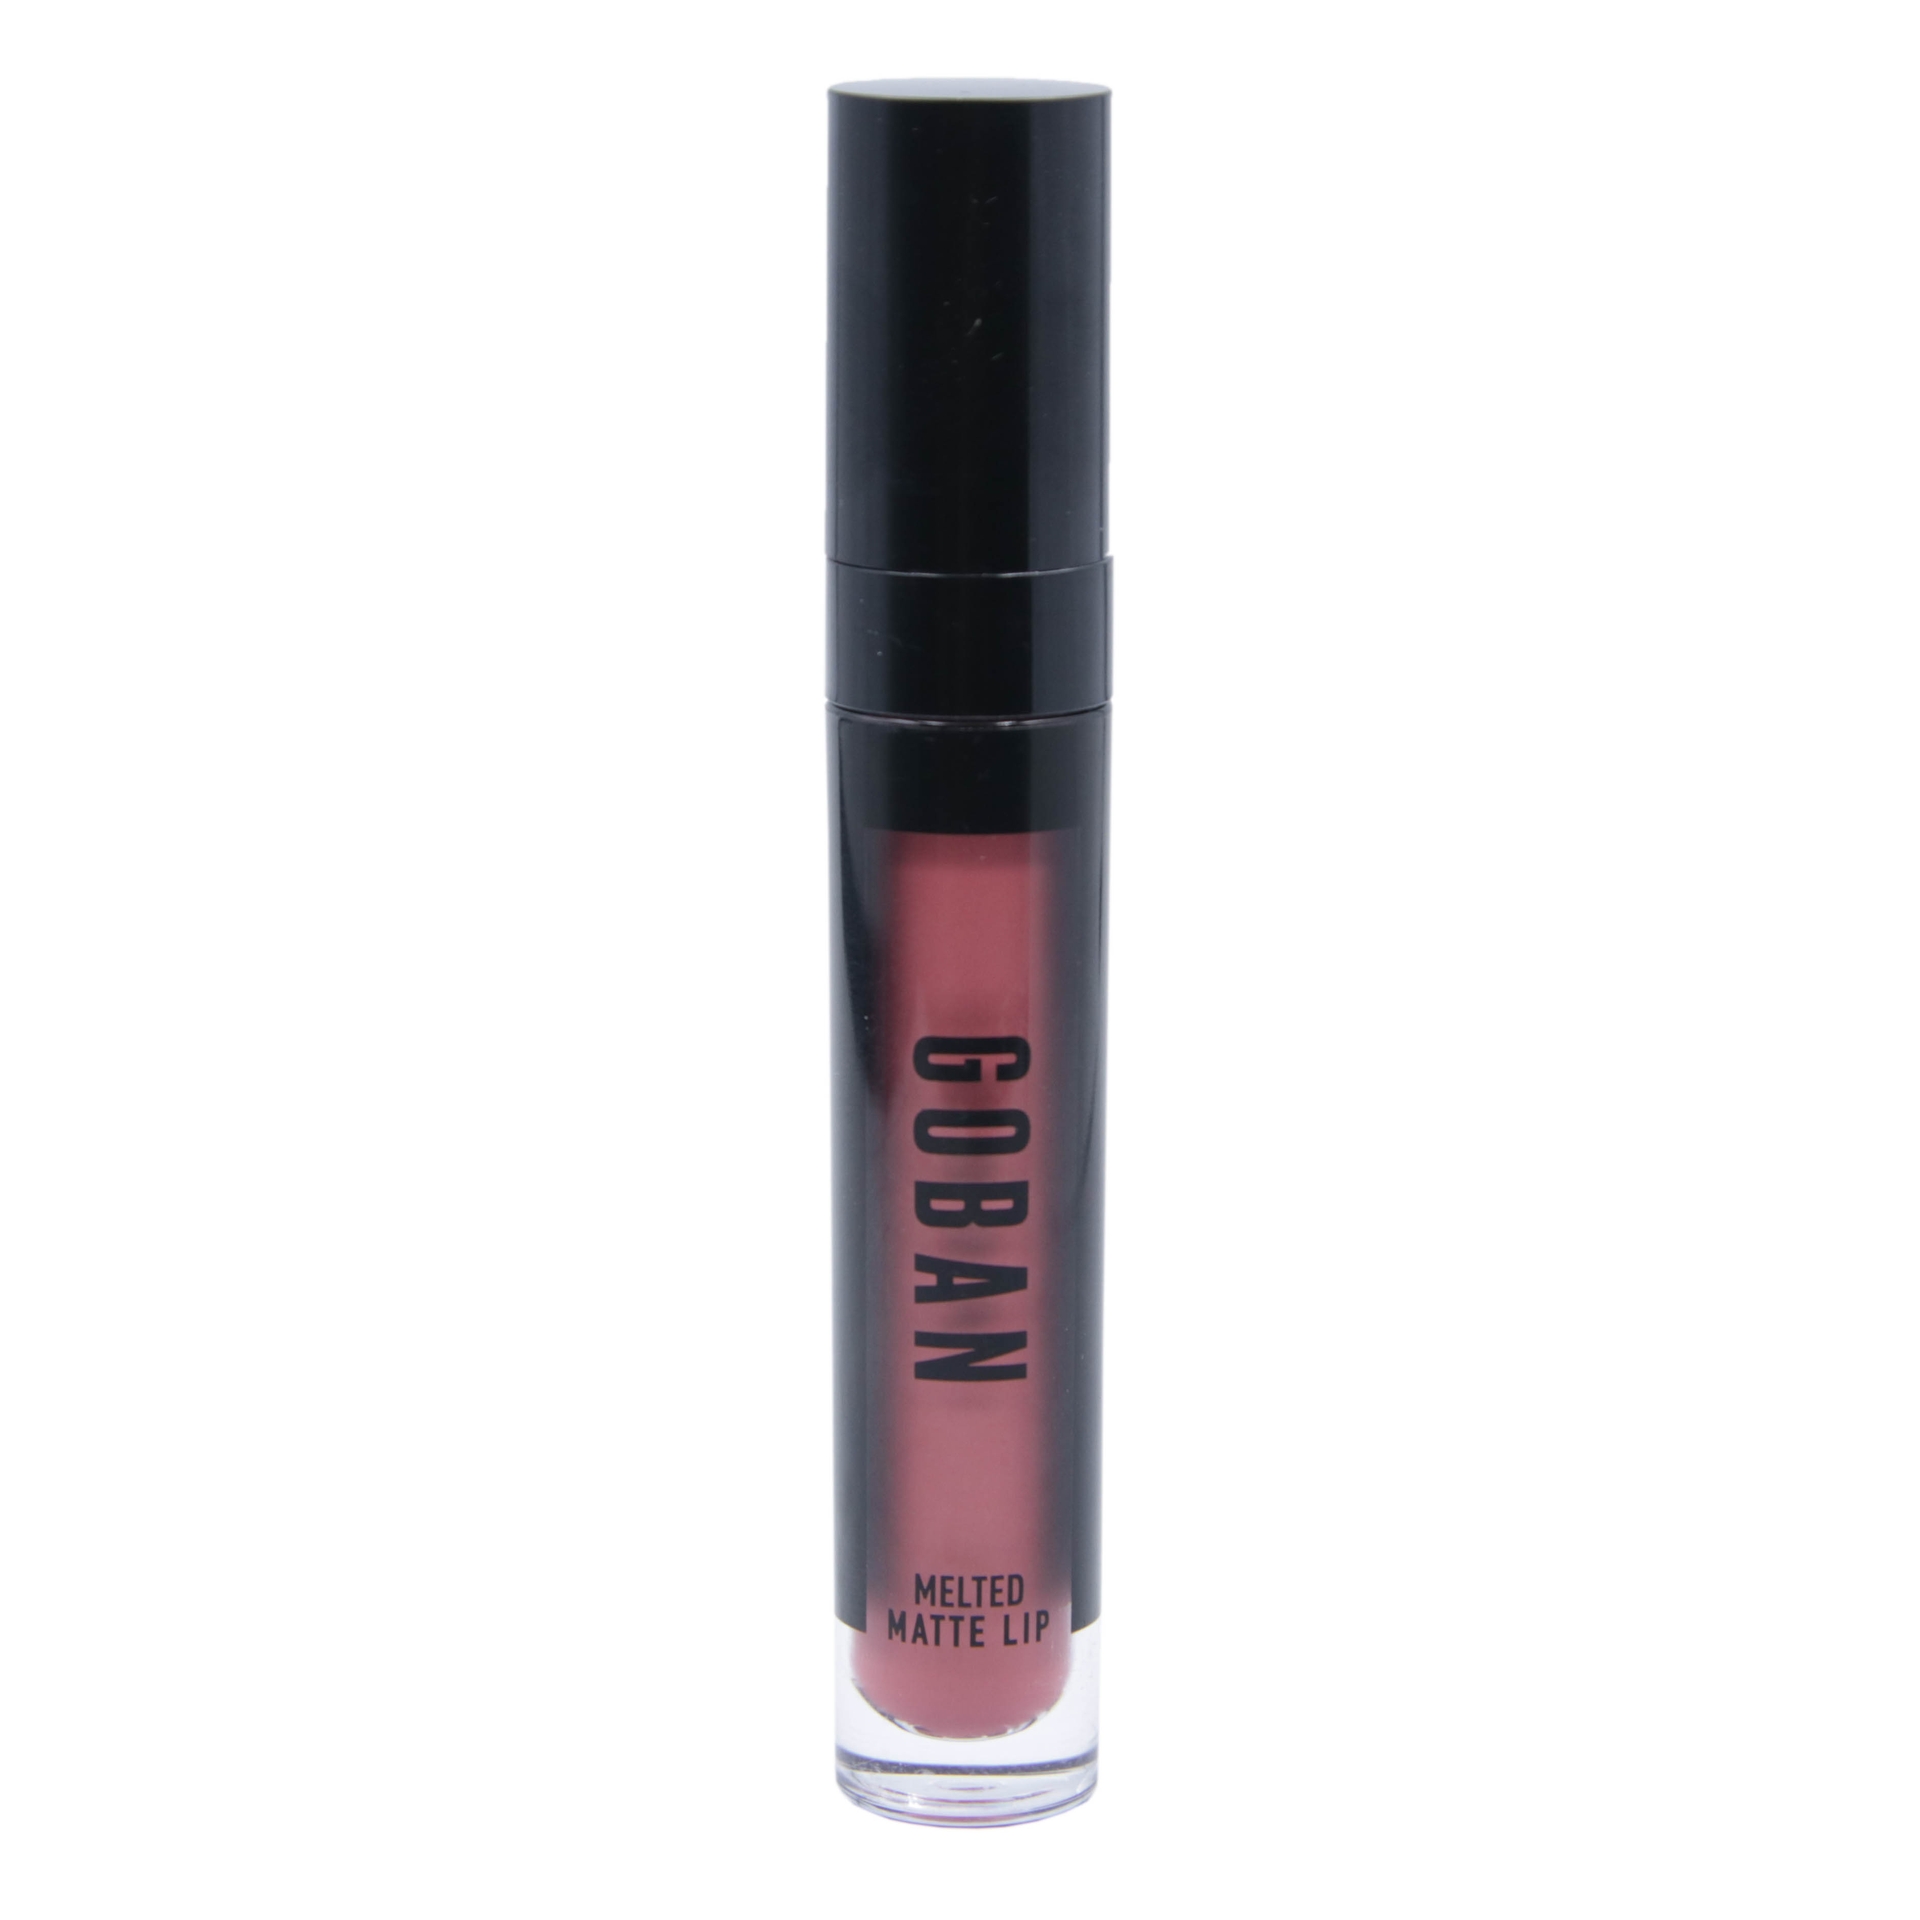 Goban Melted Matte Lip Butterfly Lips